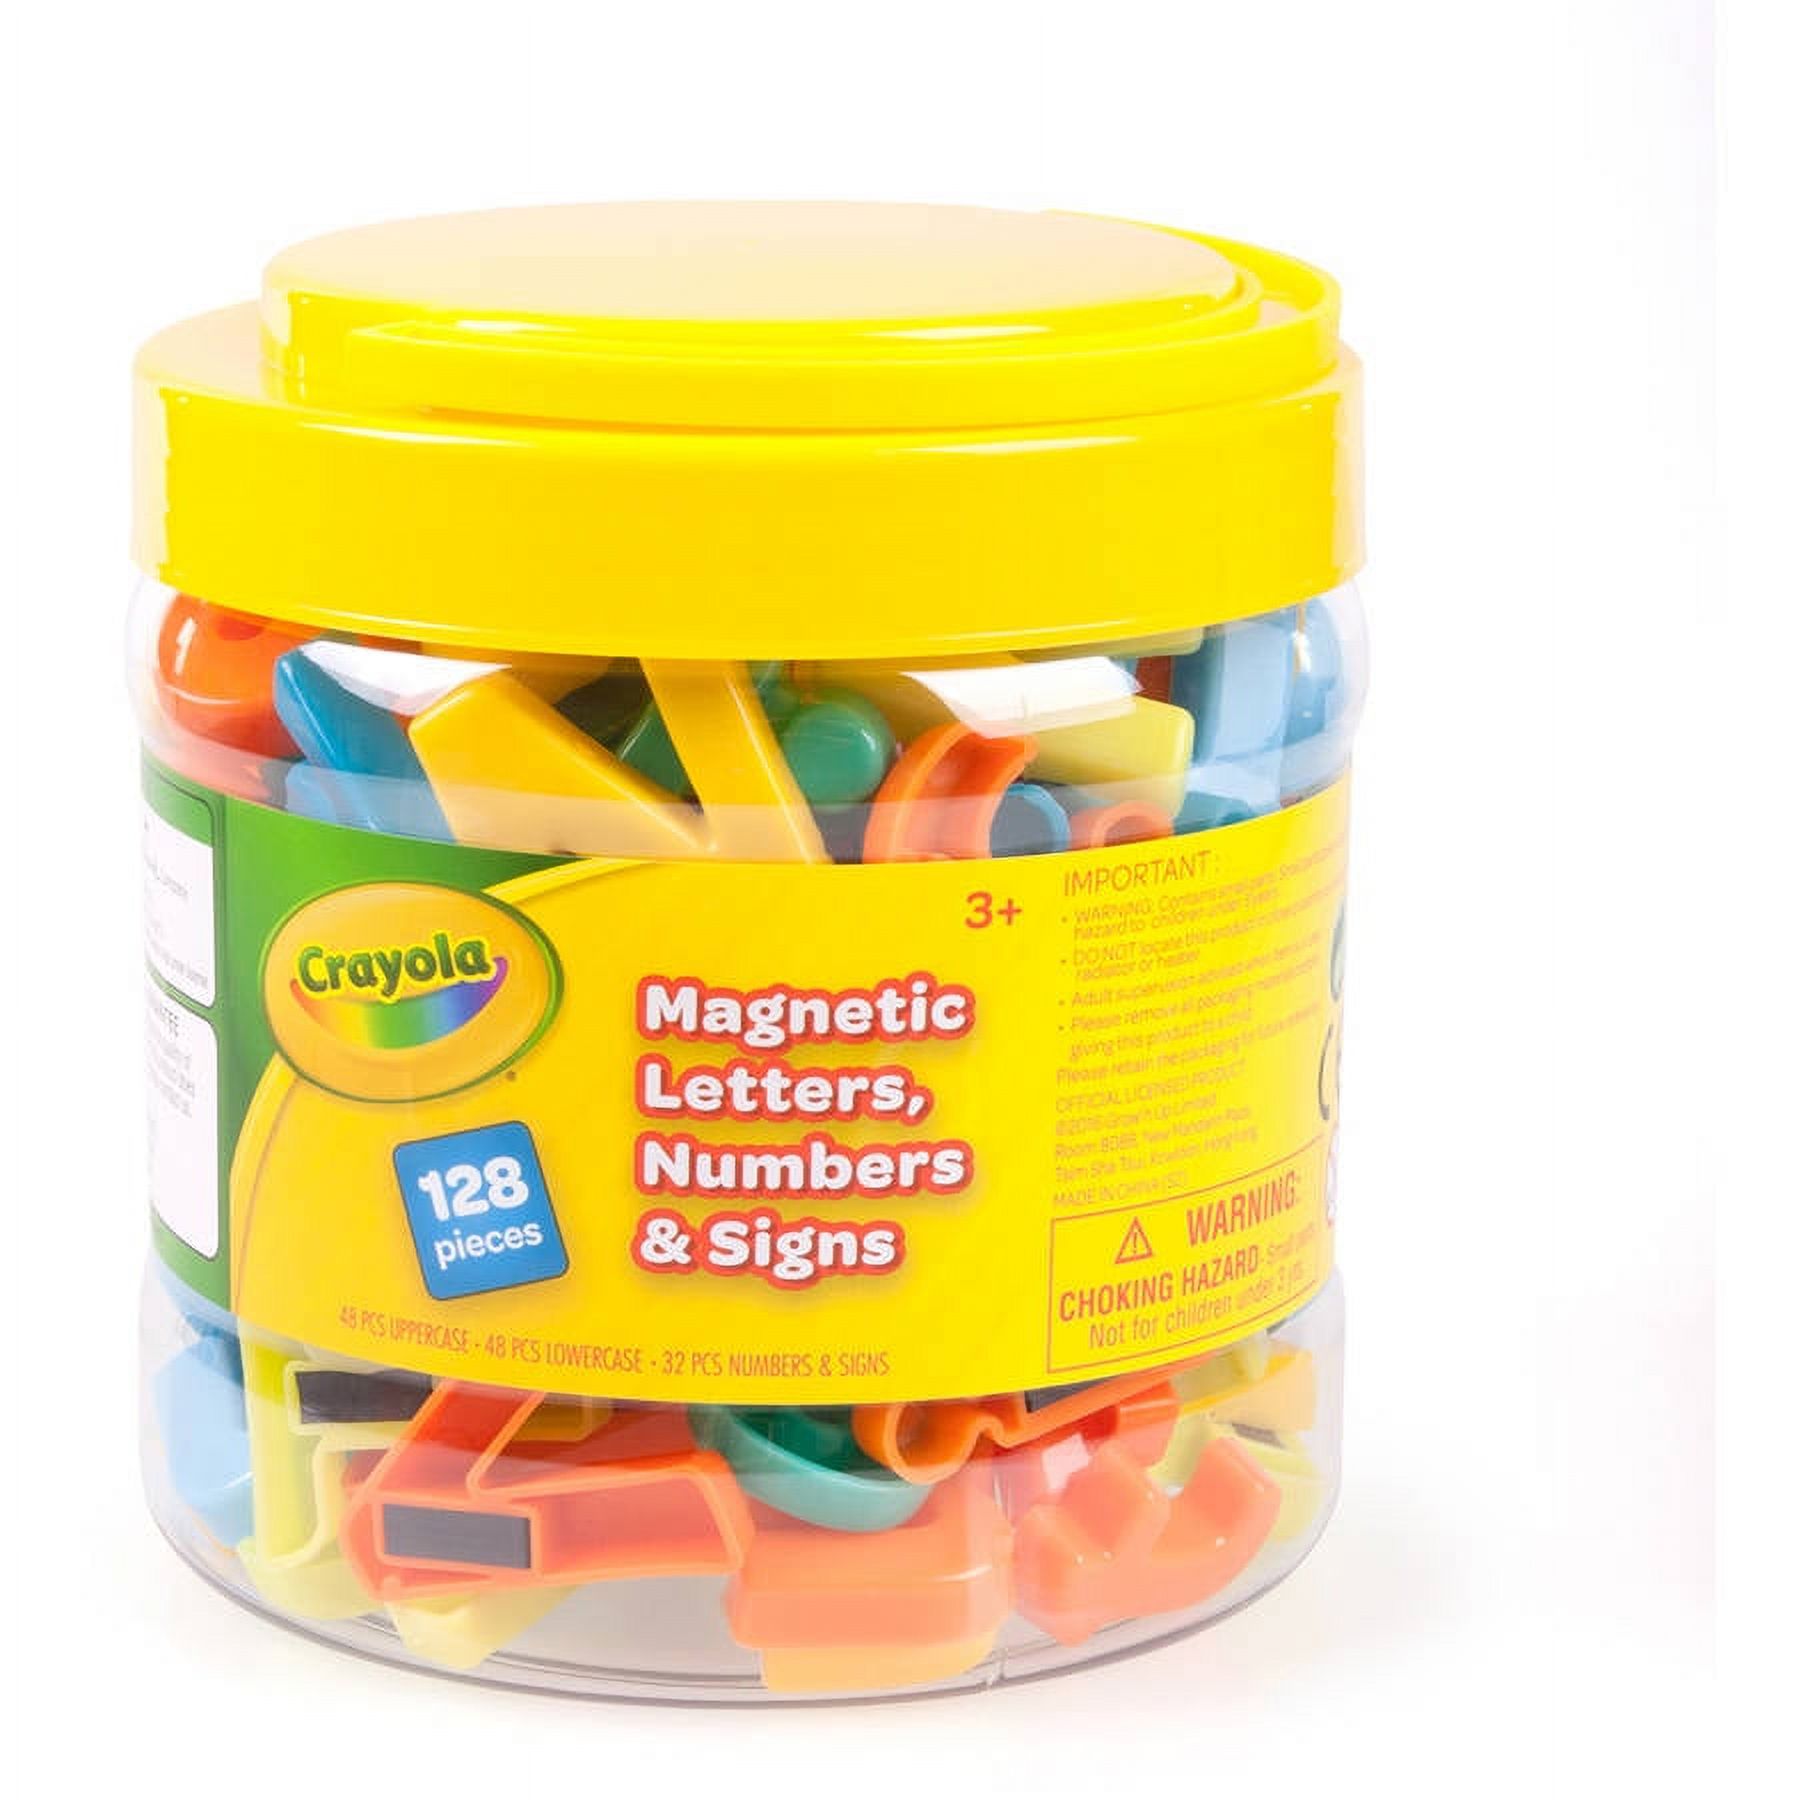 Crayola 128-Piece Letter Magnet Set: Great for Easels - image 1 of 5